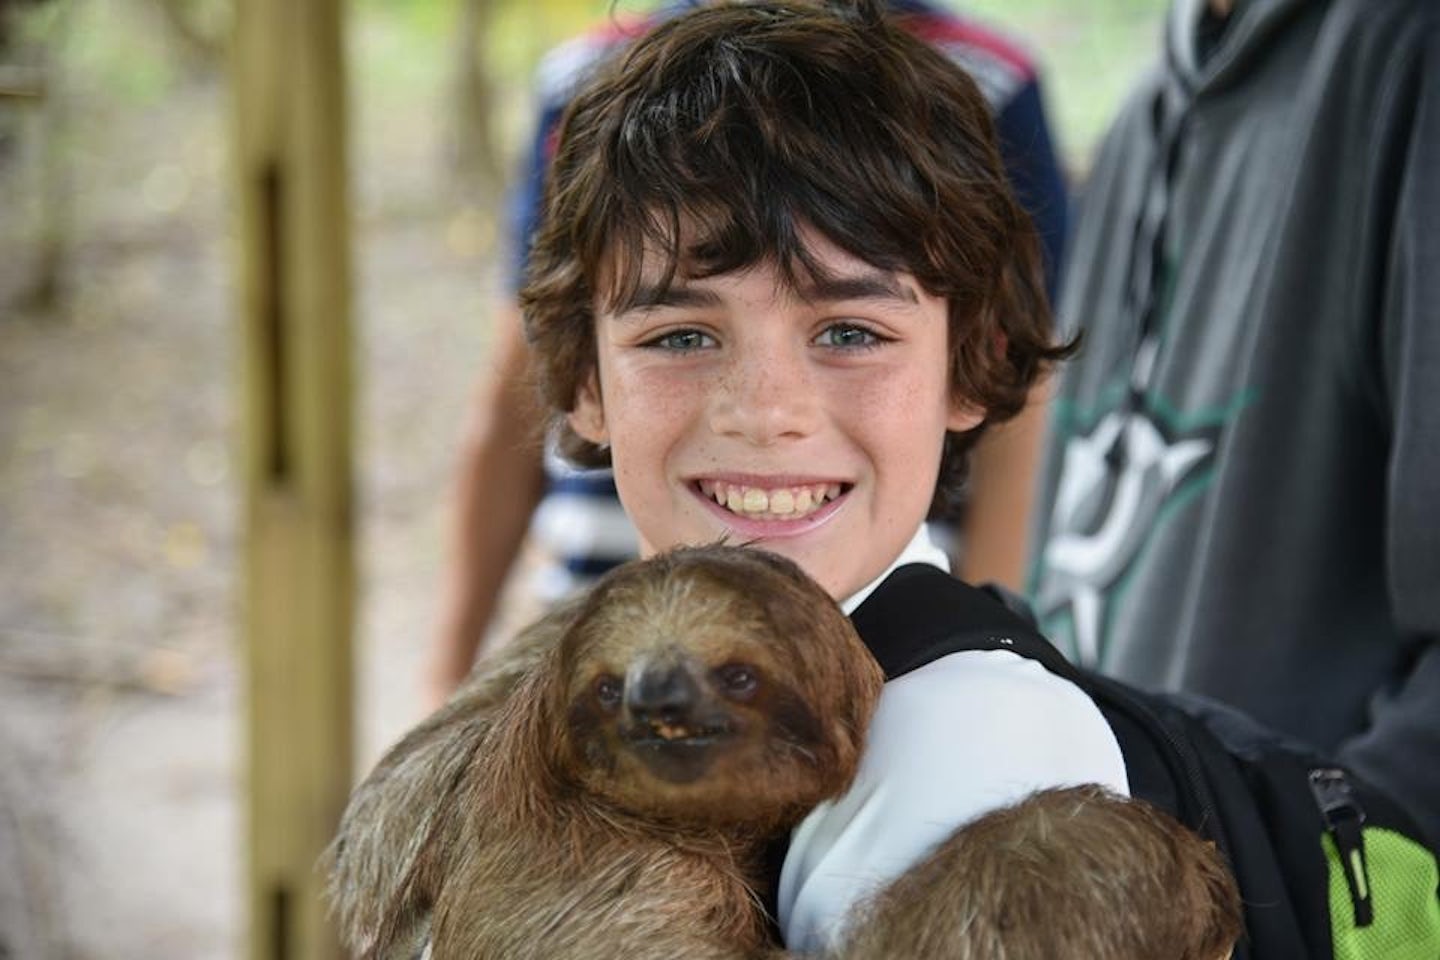 We all fell in love with the Sloths I’m Roatan